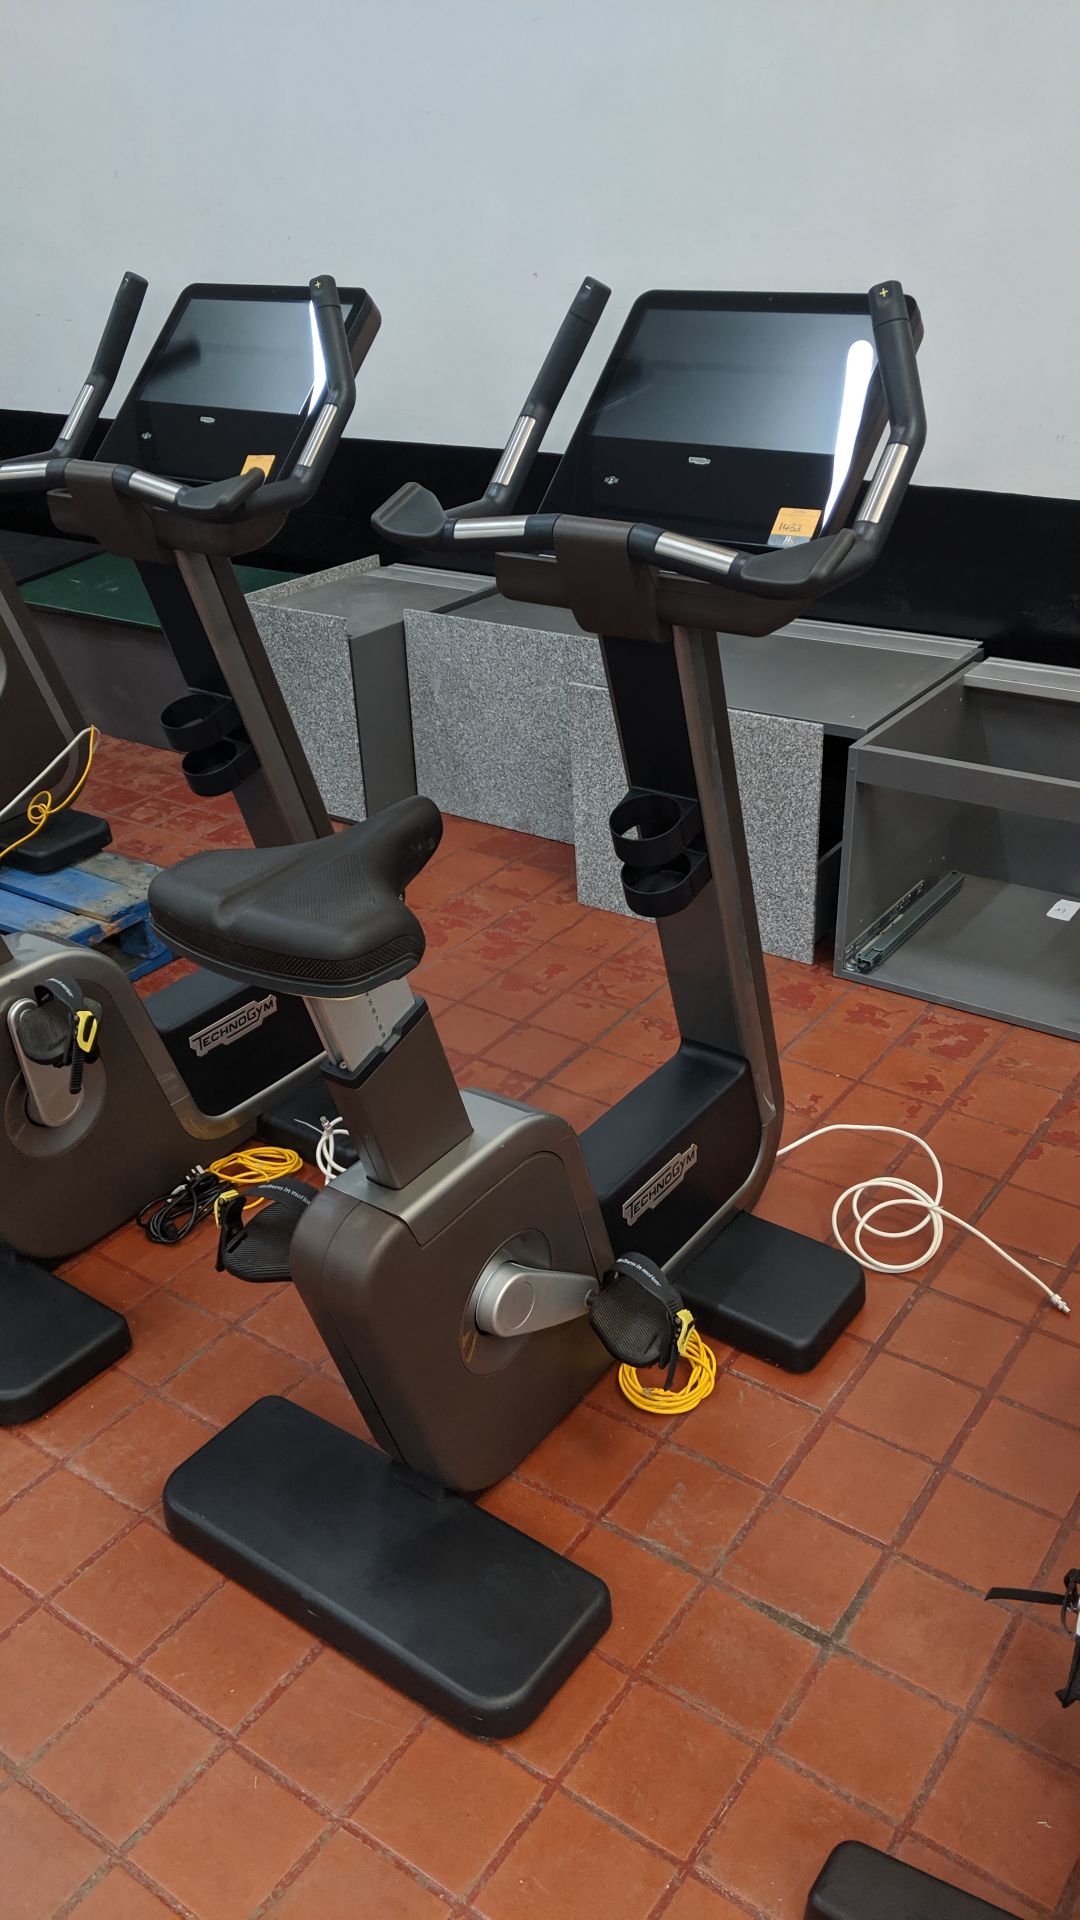 Technogym Artis exercise bike. Purchased new in 2016 - refurbished/recommissioned by Technogym - - Image 4 of 15